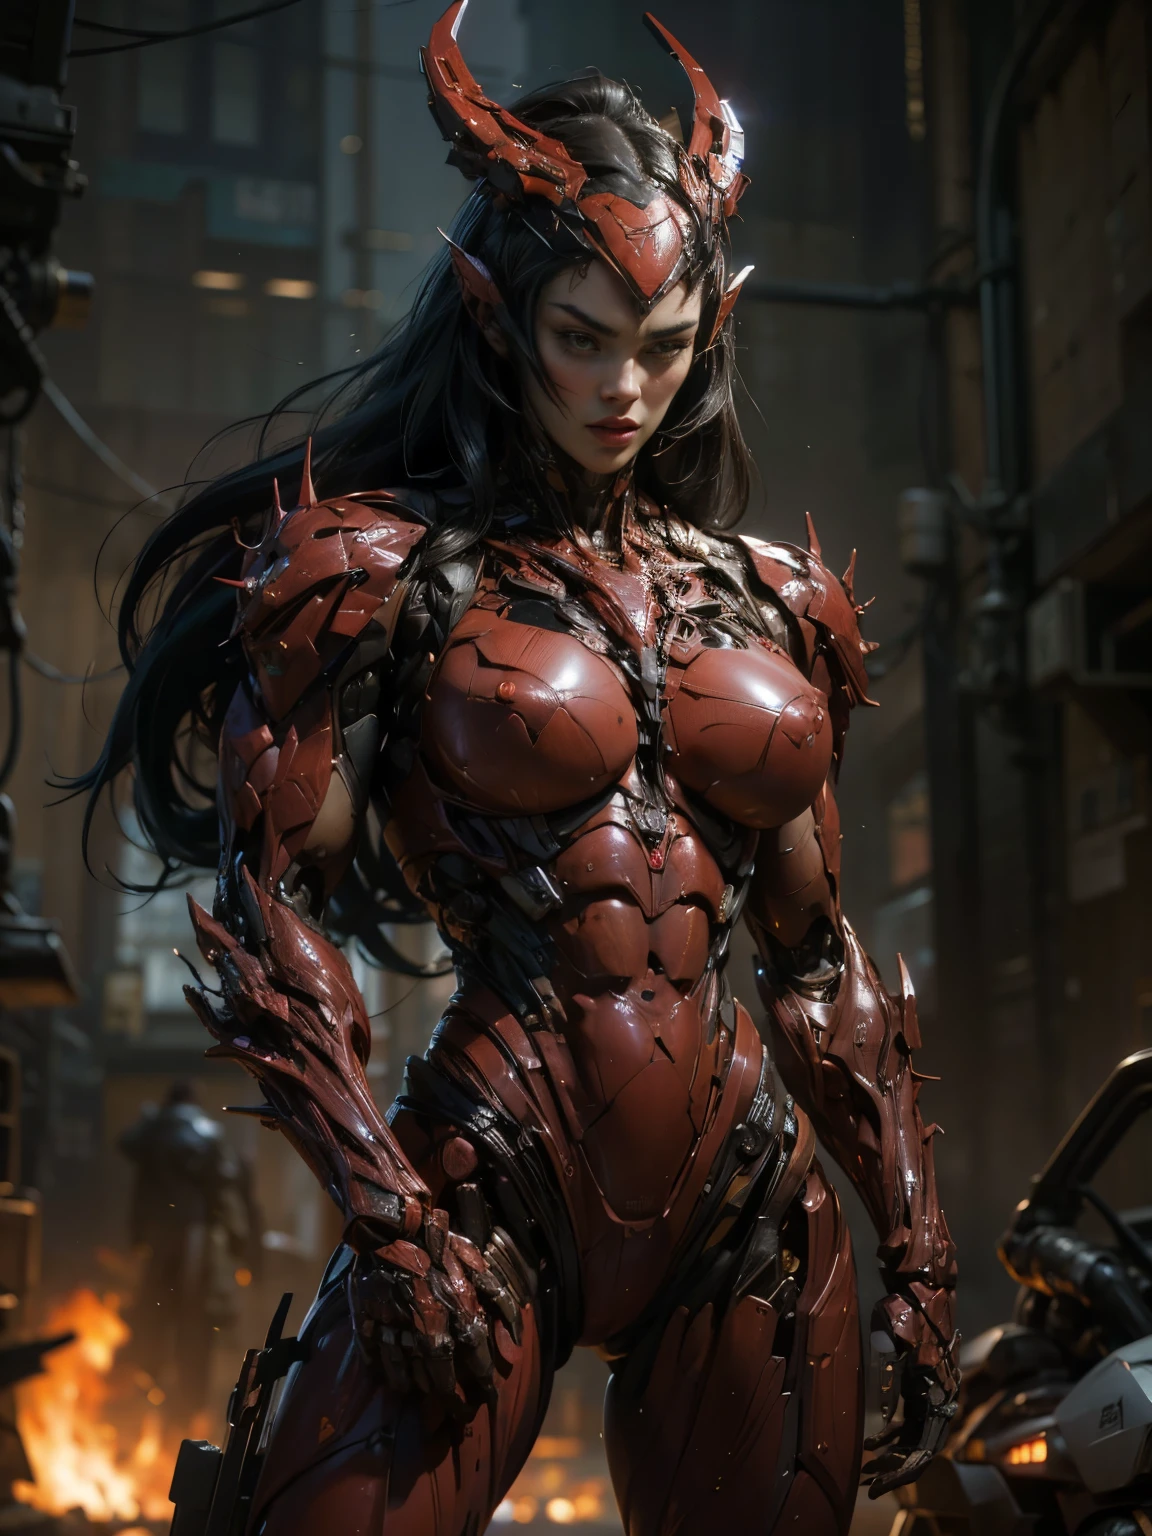 (Megan Fox), cinematic, super detailed, and insanely detailed, This work of art captures the essence of a hairless muscular android girl.. beautifully color-graded, improving the overall cinematic experience. Unreal Engine brings her anatomical cybernetic muscle suit to life, looks even more mesmerizing. Using depth of field (INFLUENZA), every detail is focused and accentuated, drawing attention to her eyes and the intricate design of her anatomical cybernetic muscular suit. . Image resolution at its peak, use of ultra-high resolution technology, ensuring the perfect quality of every pixel. cinematic lighting enhances her aura, while smoothing methods, such as FXAA and TXAA, keep the edges smooth and clean.. Adding realism to the anatomical cybernetic muscle suit, RTX technology provides ray tracing. Furthermore, SAO (Screen Space Ambient Occlusion) gives depth and realism to the scene, The girl's anatomical cybernetic muscular suit has become even more convincing. At the post-processing and post-production stages., tonal compression improves colors, creating a captivating visual experience. Интеграция CGI (Computer images) and visual effects (The visual effect smoothly reveals the complex features of the anatomical cybernetic muscular suit.. SFX (SFX) complement visual prowess, further immersing the viewer in this fantastic world. The level of detail is impressive, with complex elements, carefully crafted, works of art are hypermaximalistic and hyperrealistic. Volume effects add depth and dimension., and photorealism is incomparable. The image is displayed in 8K resolution., providing highly detailed graphics. The voluminous zipper adds a touch of magic., otherworldly emphasizing her beauty and the aura of her anatomical cybernetic muscular suit. Advanced dynamic dia